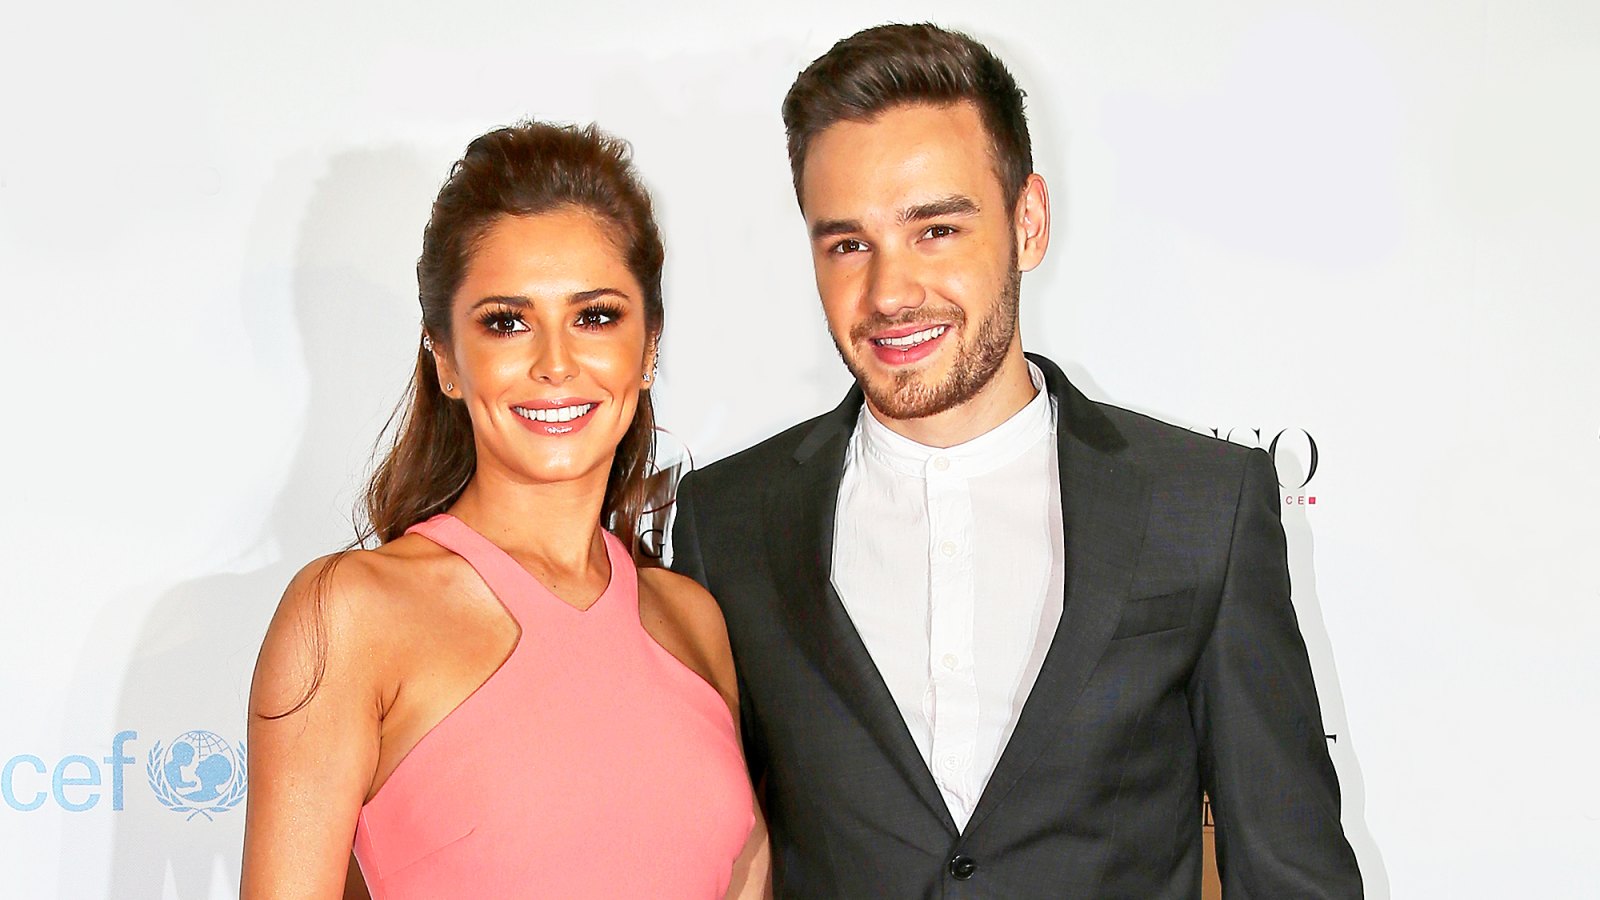 Cheryl Cole and Liam Payne attend the 7th edition of the Global Gift 2016 Gala diner in Paris at the Four Seasons Hotel in Paris, France.